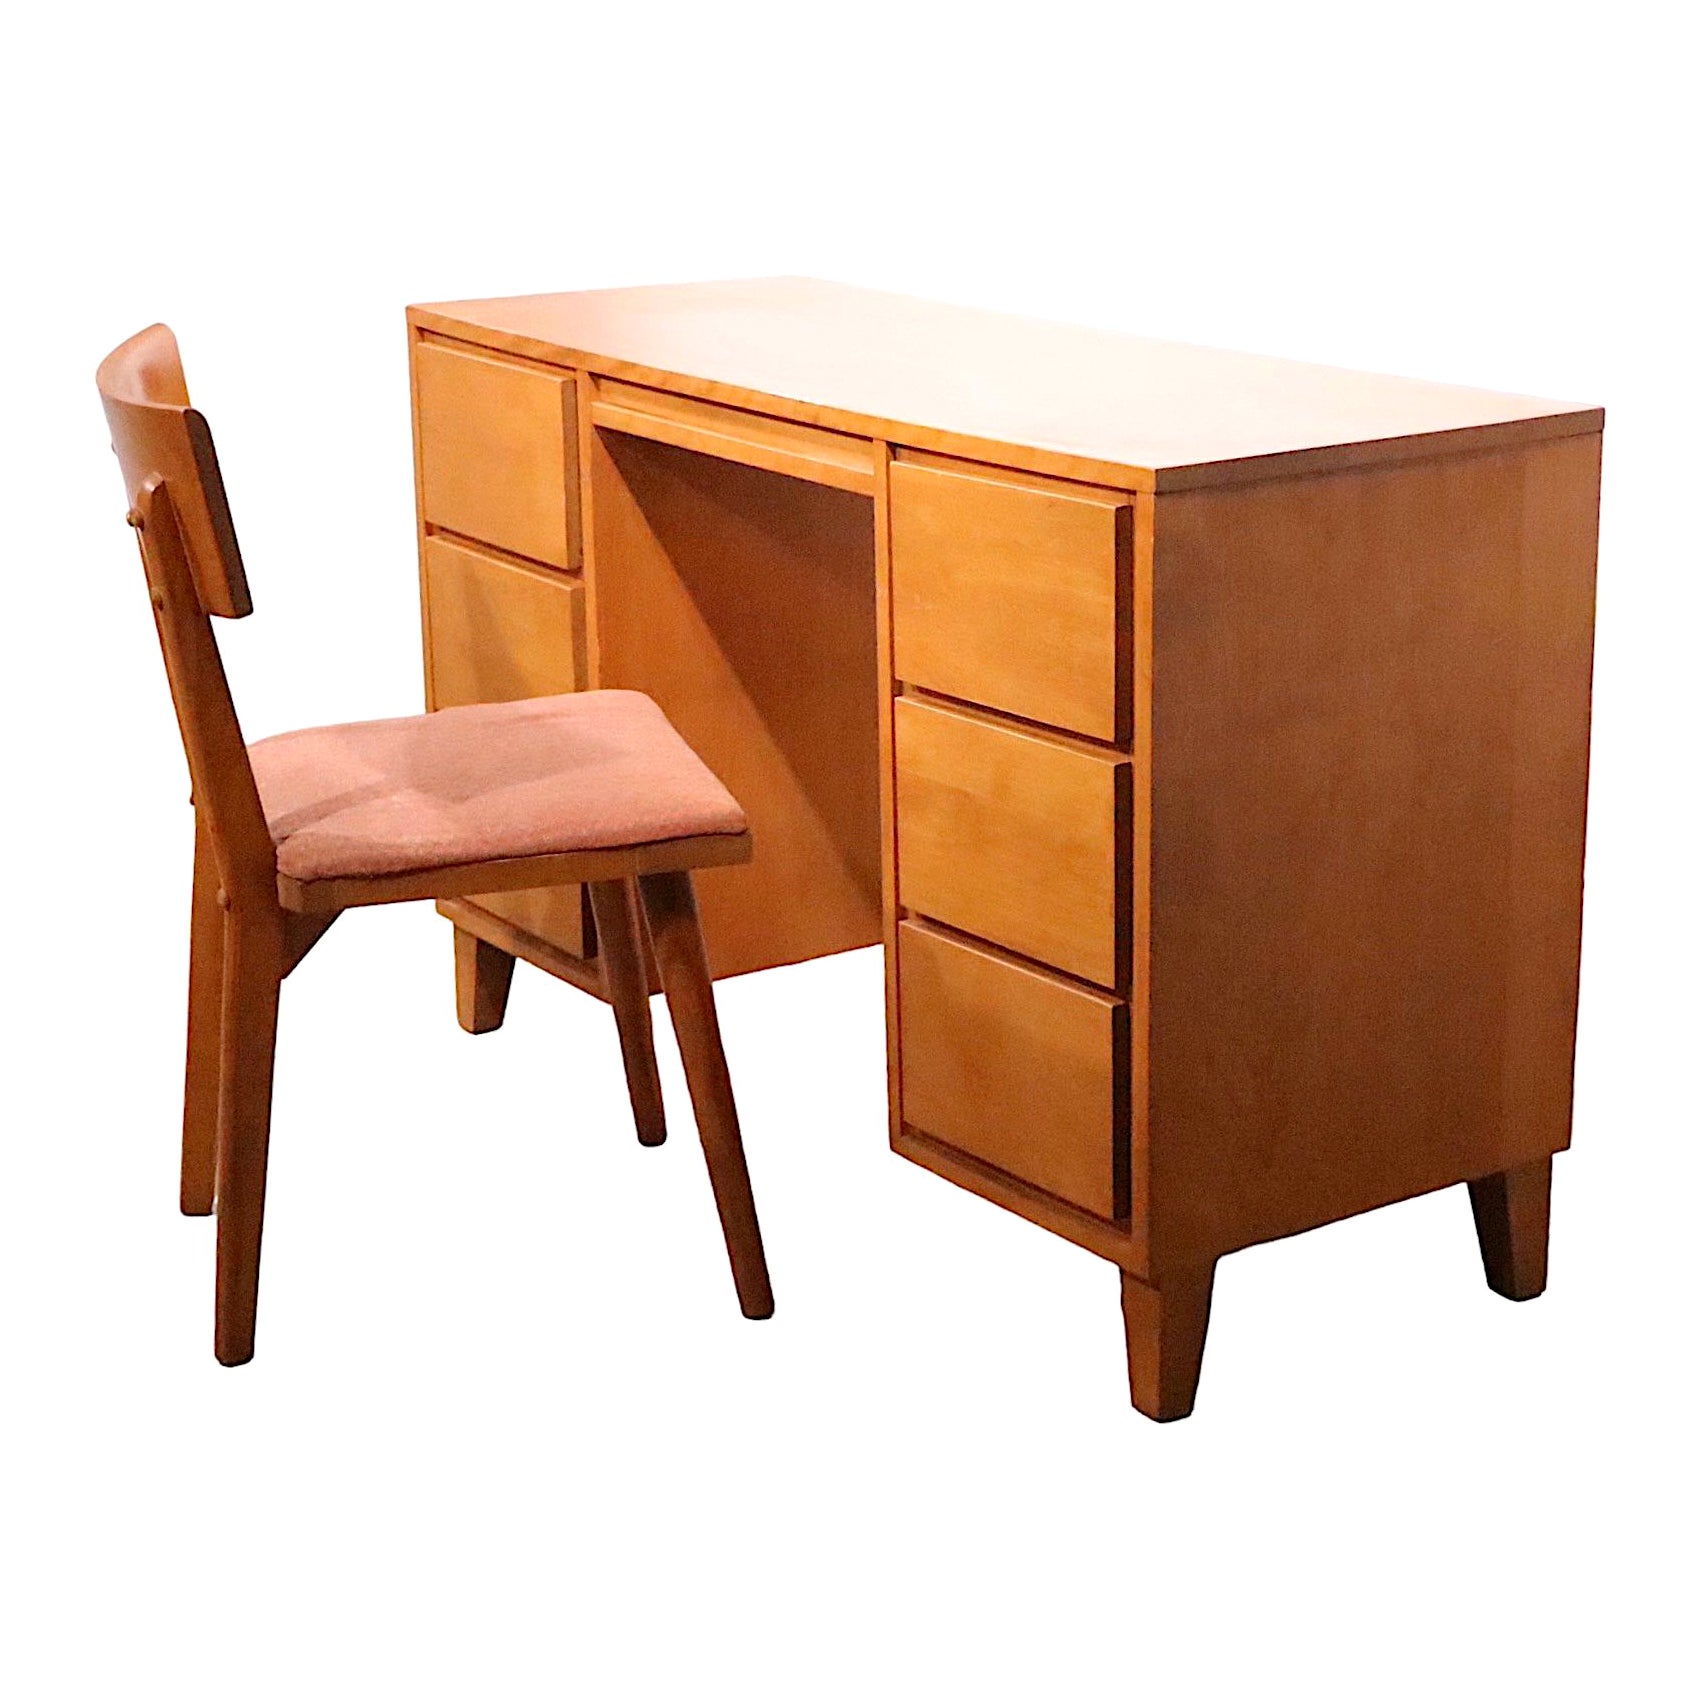 1950's Mid Century Desk and Chair Conant Ball  Modern Mates by Leslie Diamond  